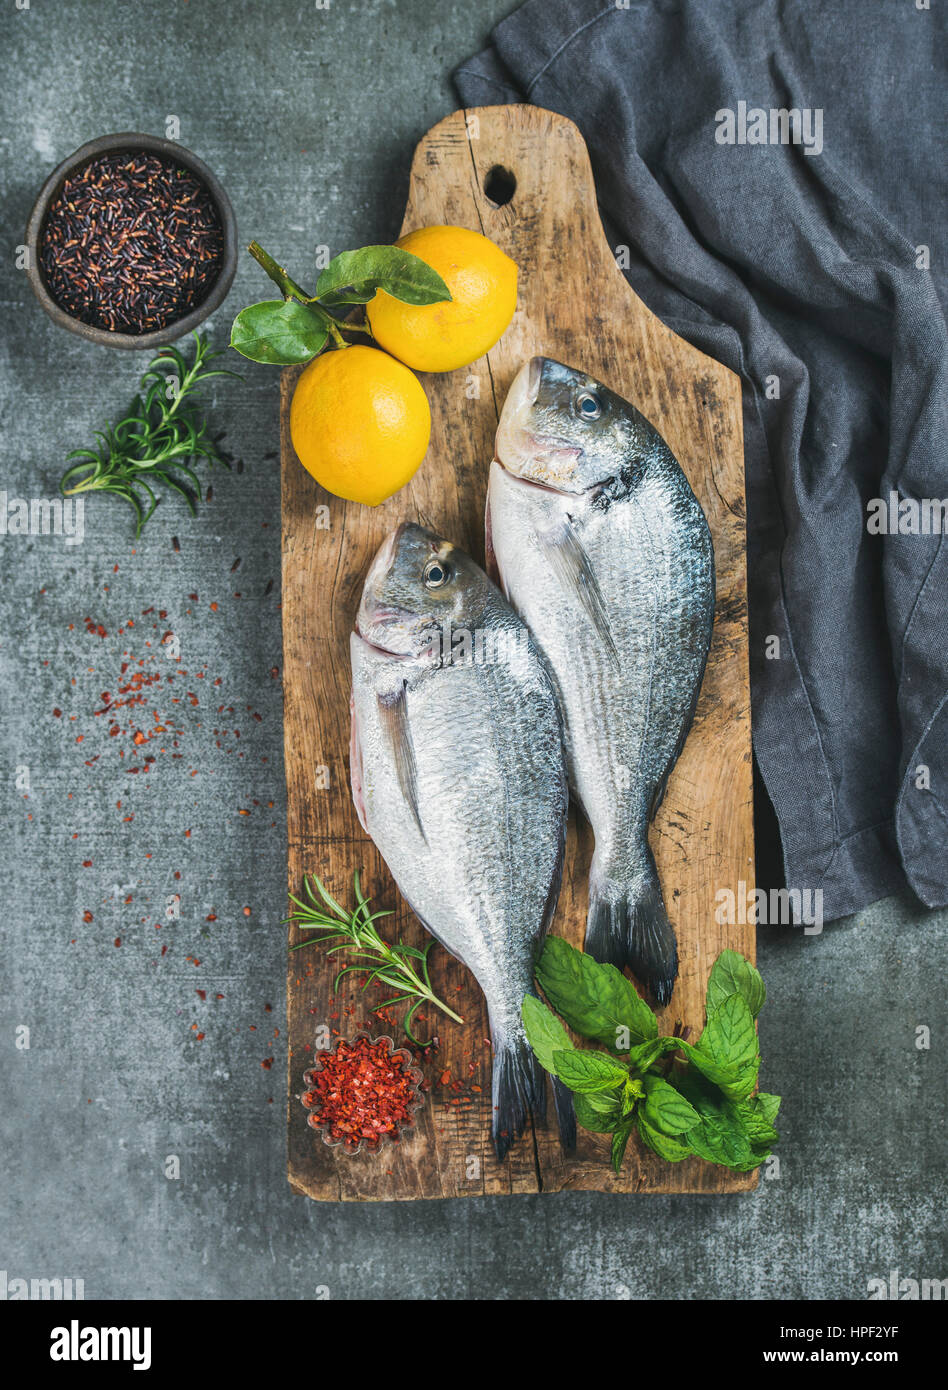 Fresh uncooked sea bream or dorado fish with lemon, herbs and spices in bowls on rustic wooden board over grey concrete background, top view. Healthy, Stock Photo